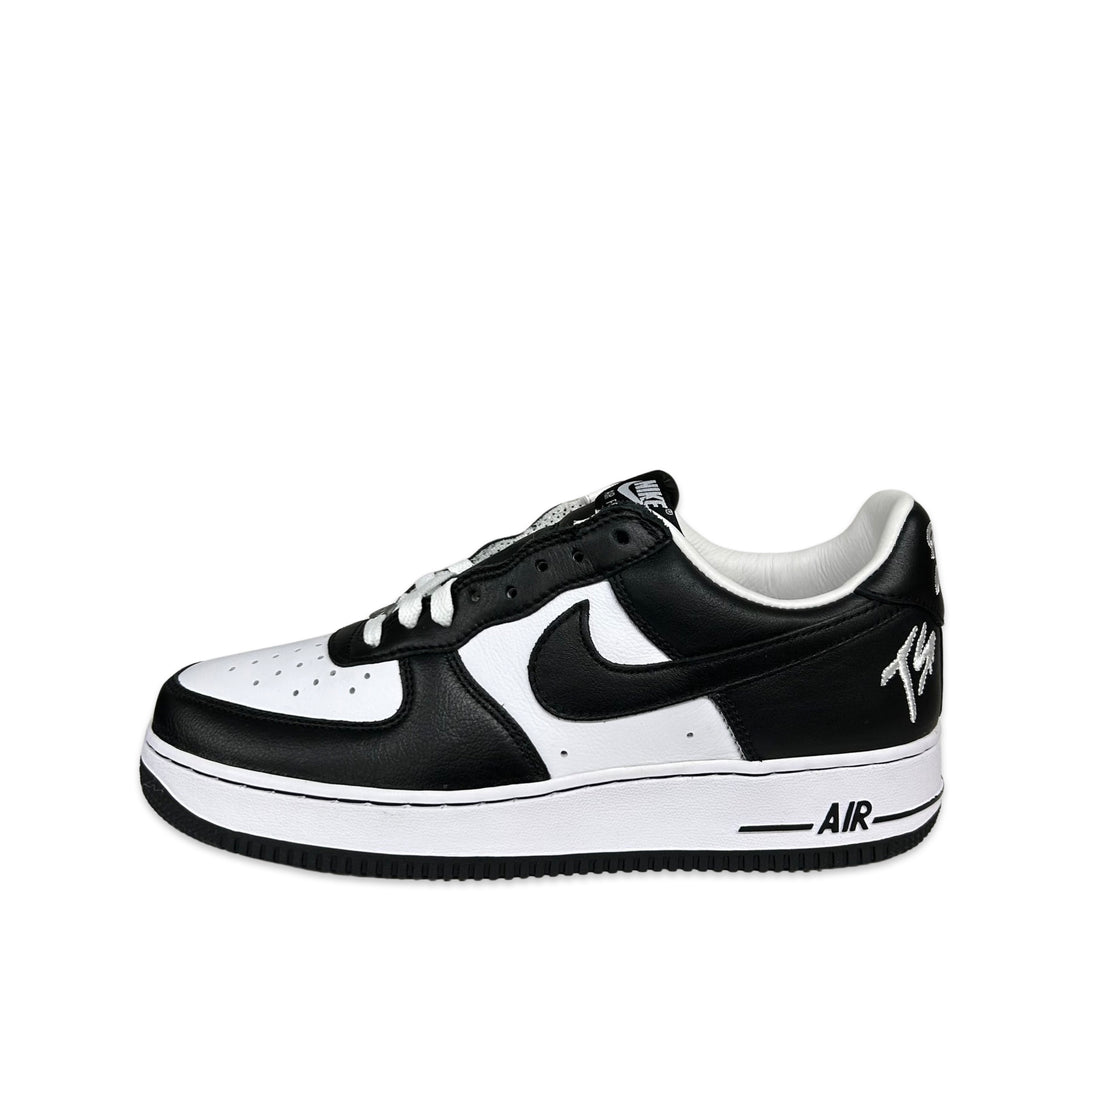 NIKE AIR FORCE ONE “TERROR SQUAD”